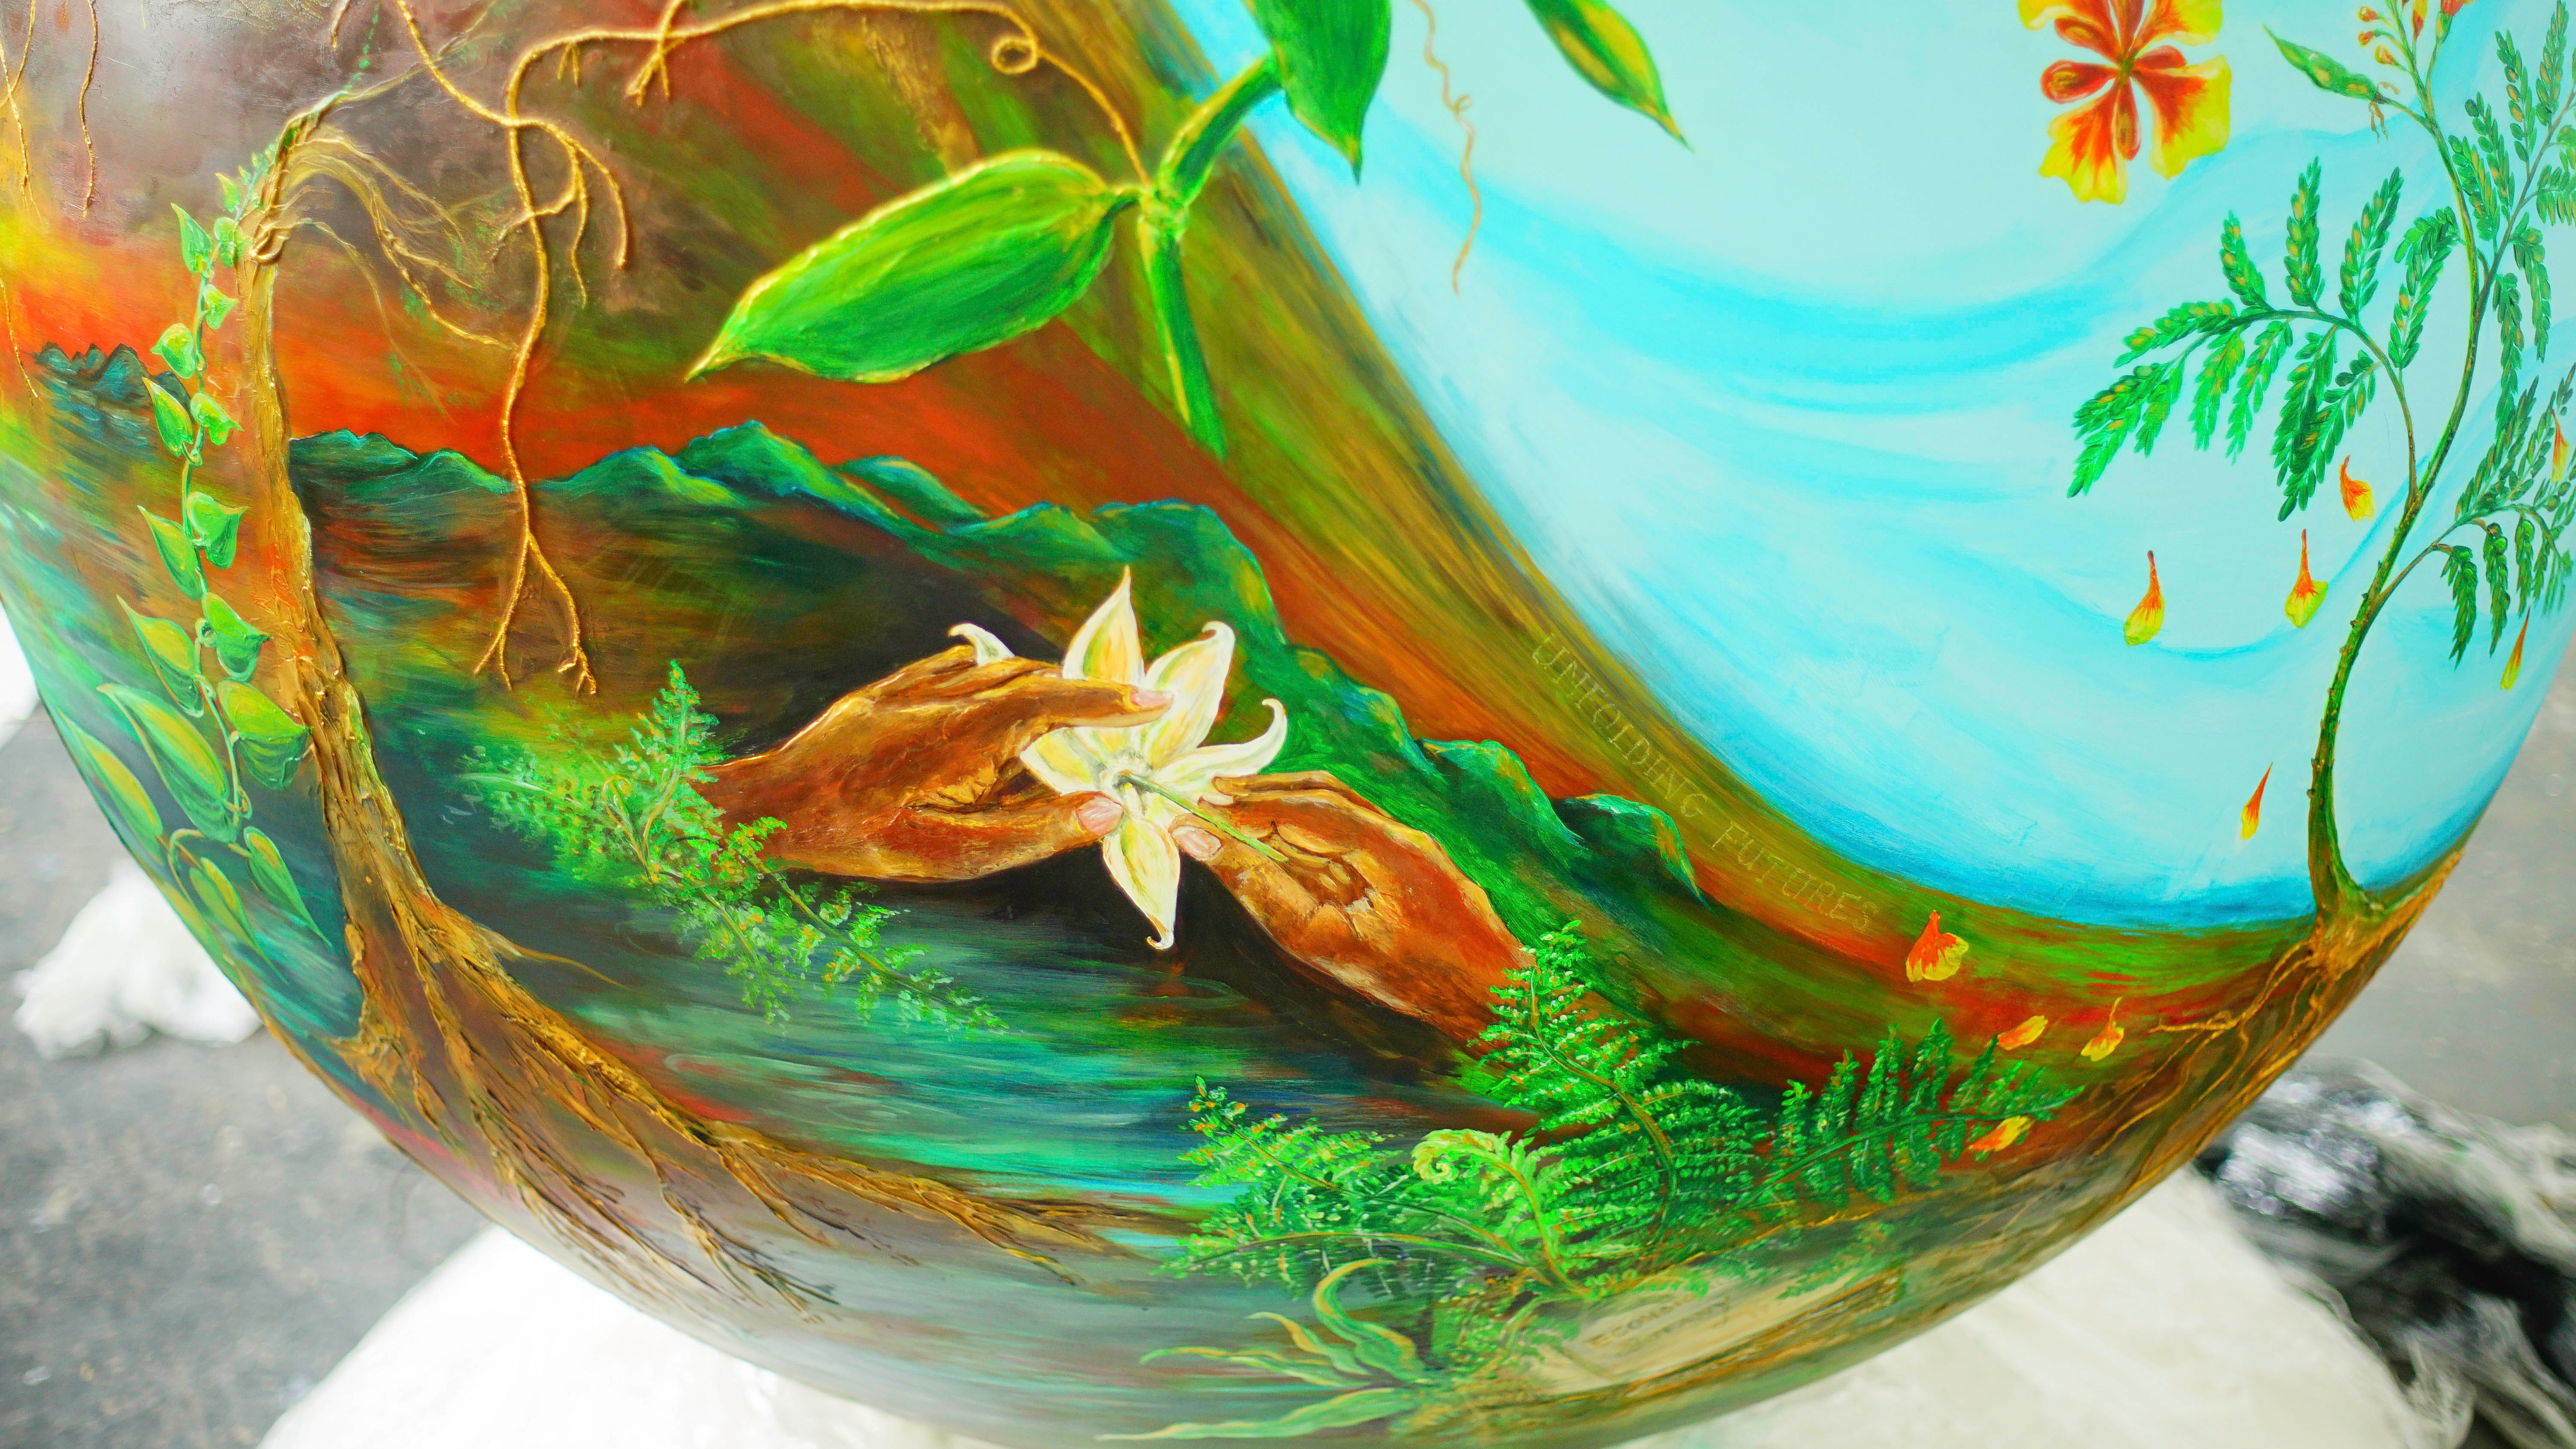 A close up of the globe painted by Carol Sorhaindo for Swansea. There are two hands holding a white flour, a landscape with plants, trees and mountains.